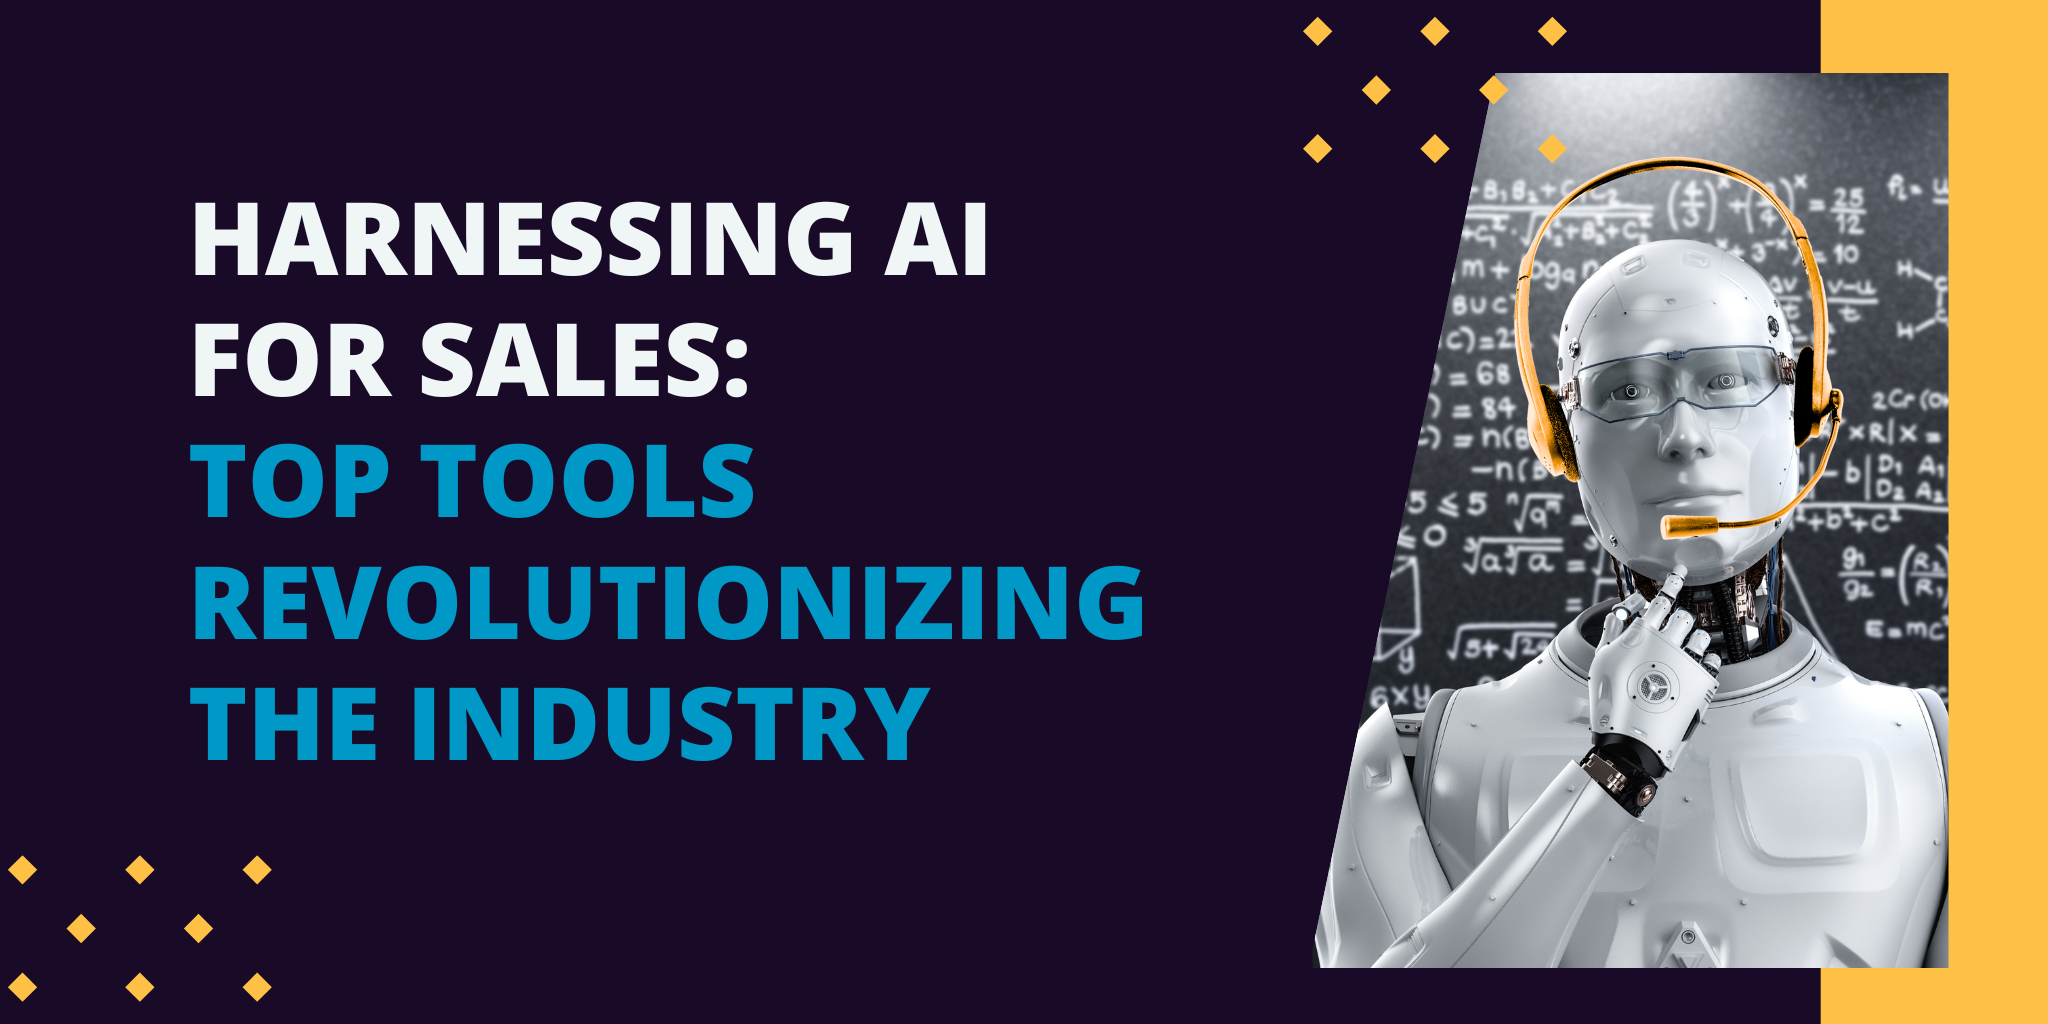 Harnessing AI for Sales: Top Tools Revolutionizing the Industry